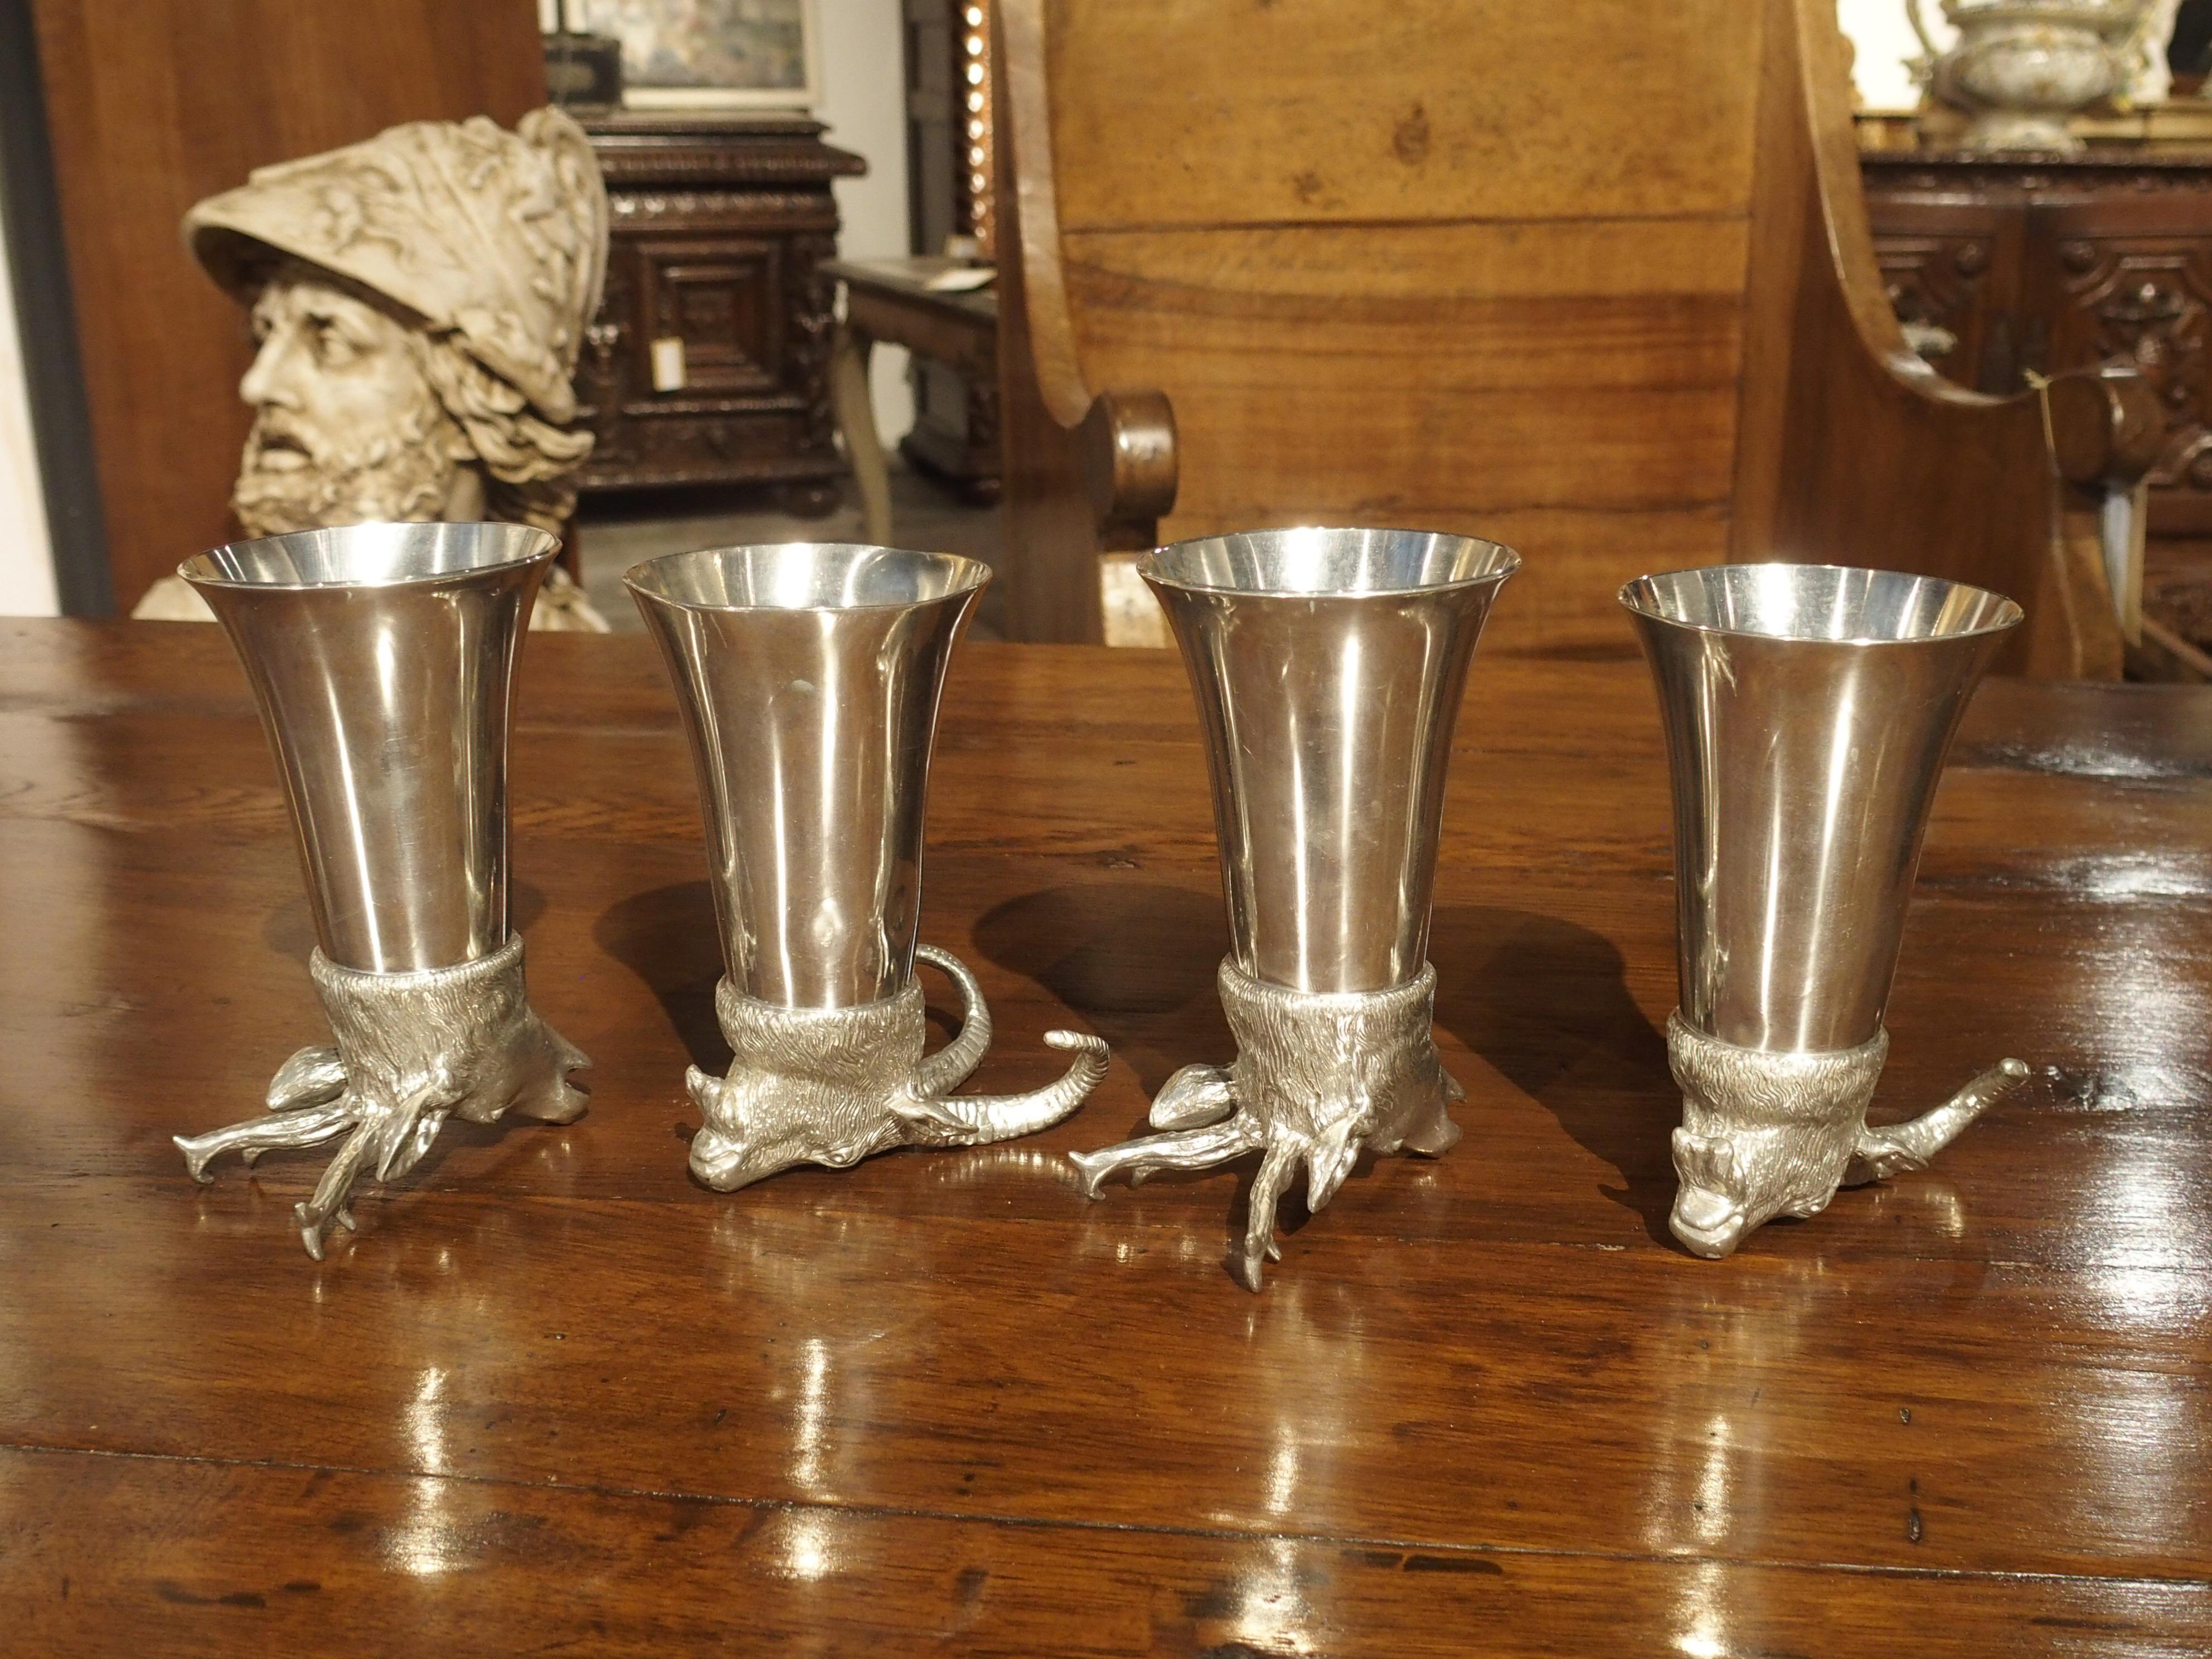 Set of 4 Polished Pewter Stag and Ibex Stirrup Cups with Ice Bucket 6